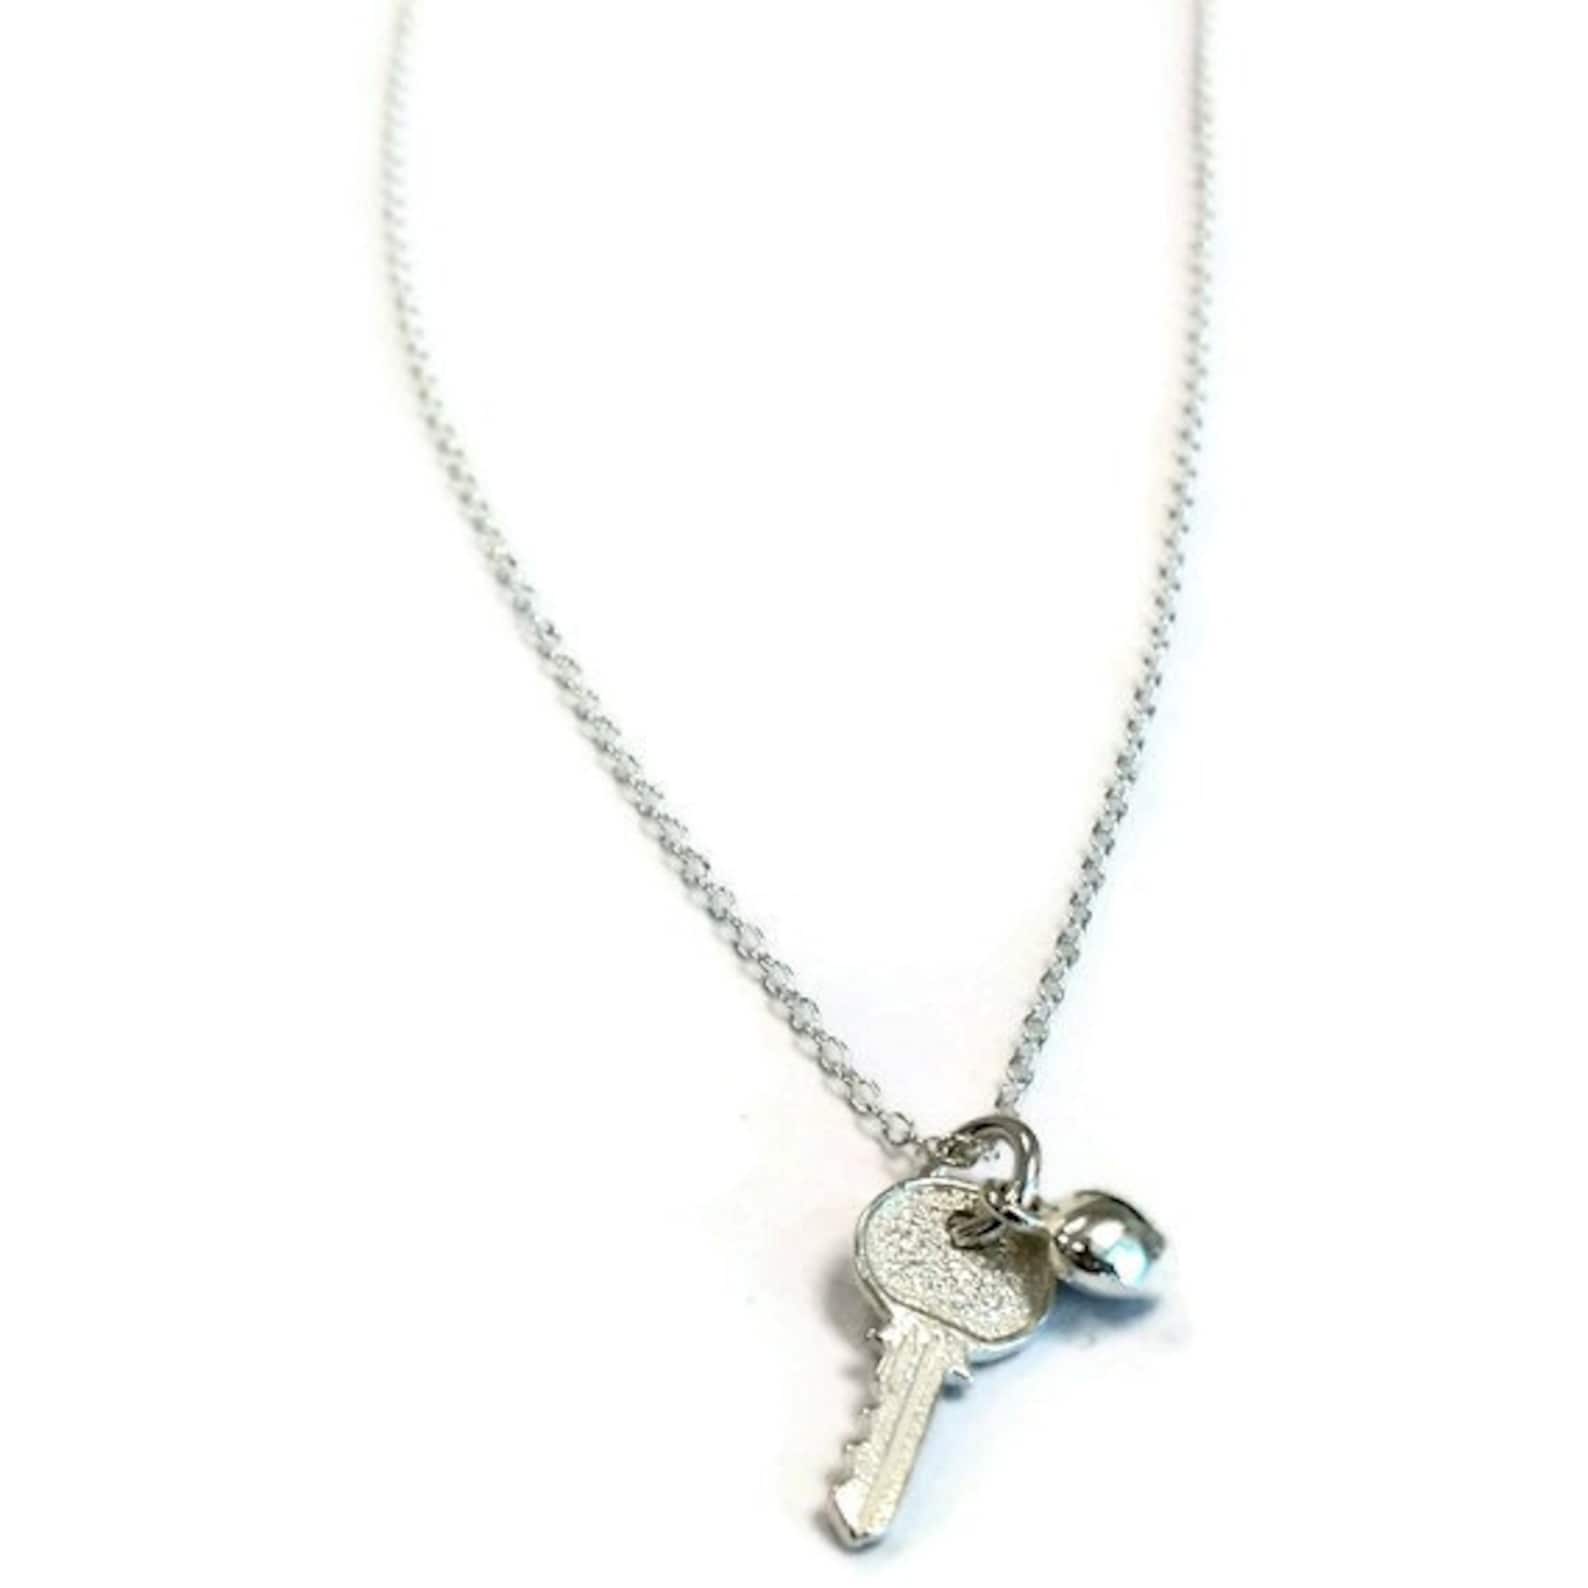 Key and Heart Charm Necklace Sterling Silver Jewelry Chain - Etsy